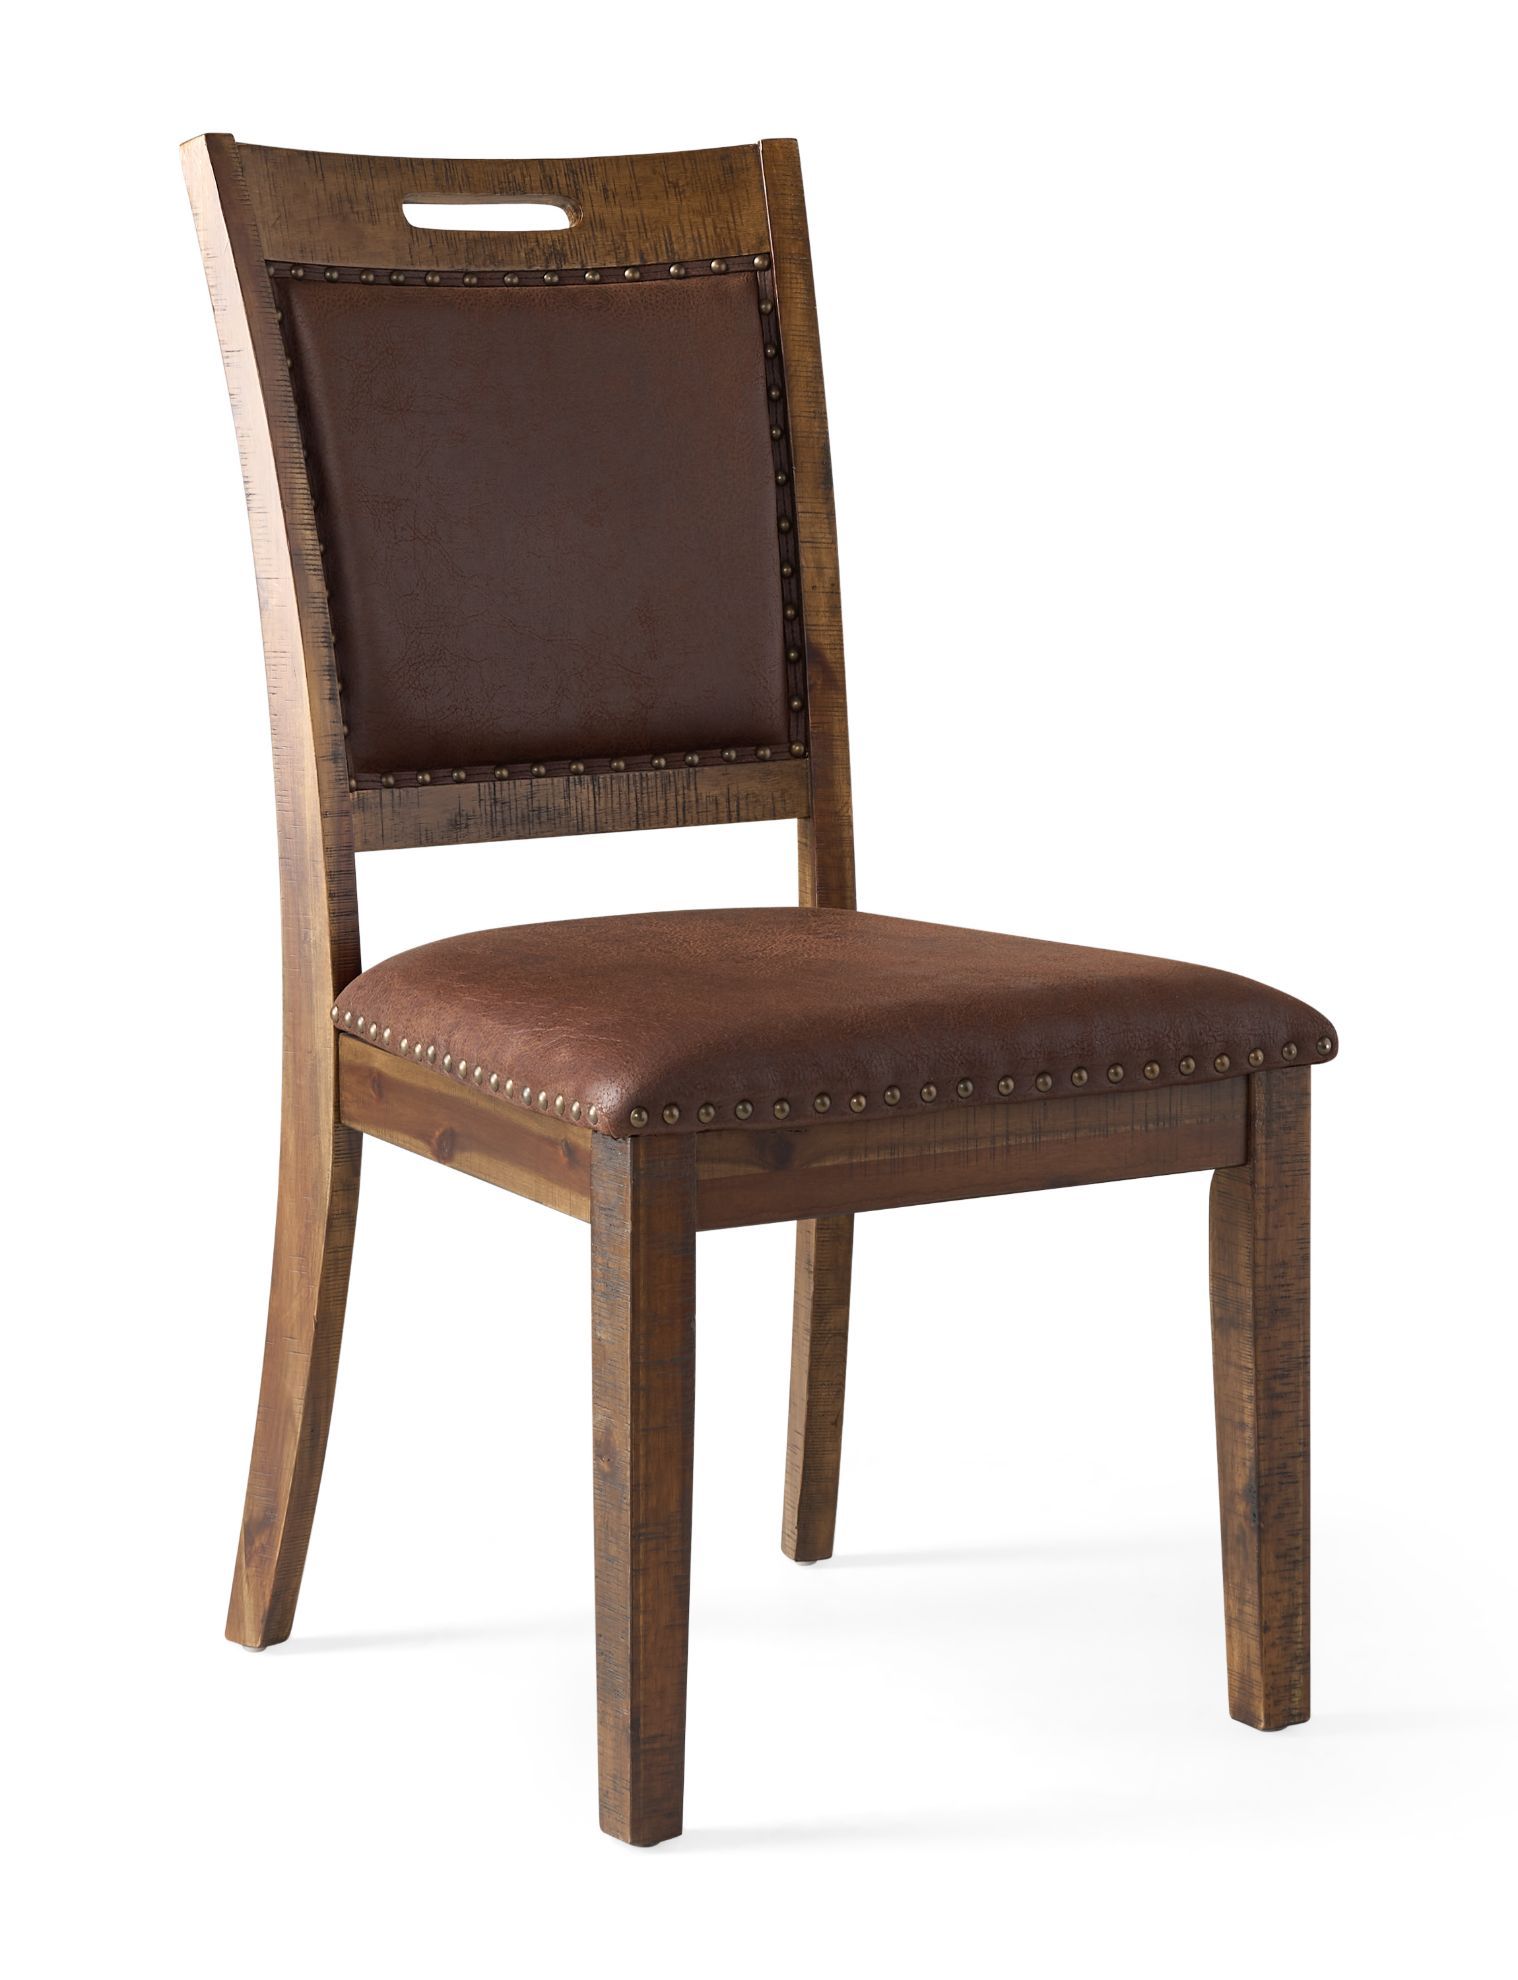 Cannon Valley Dining Chair